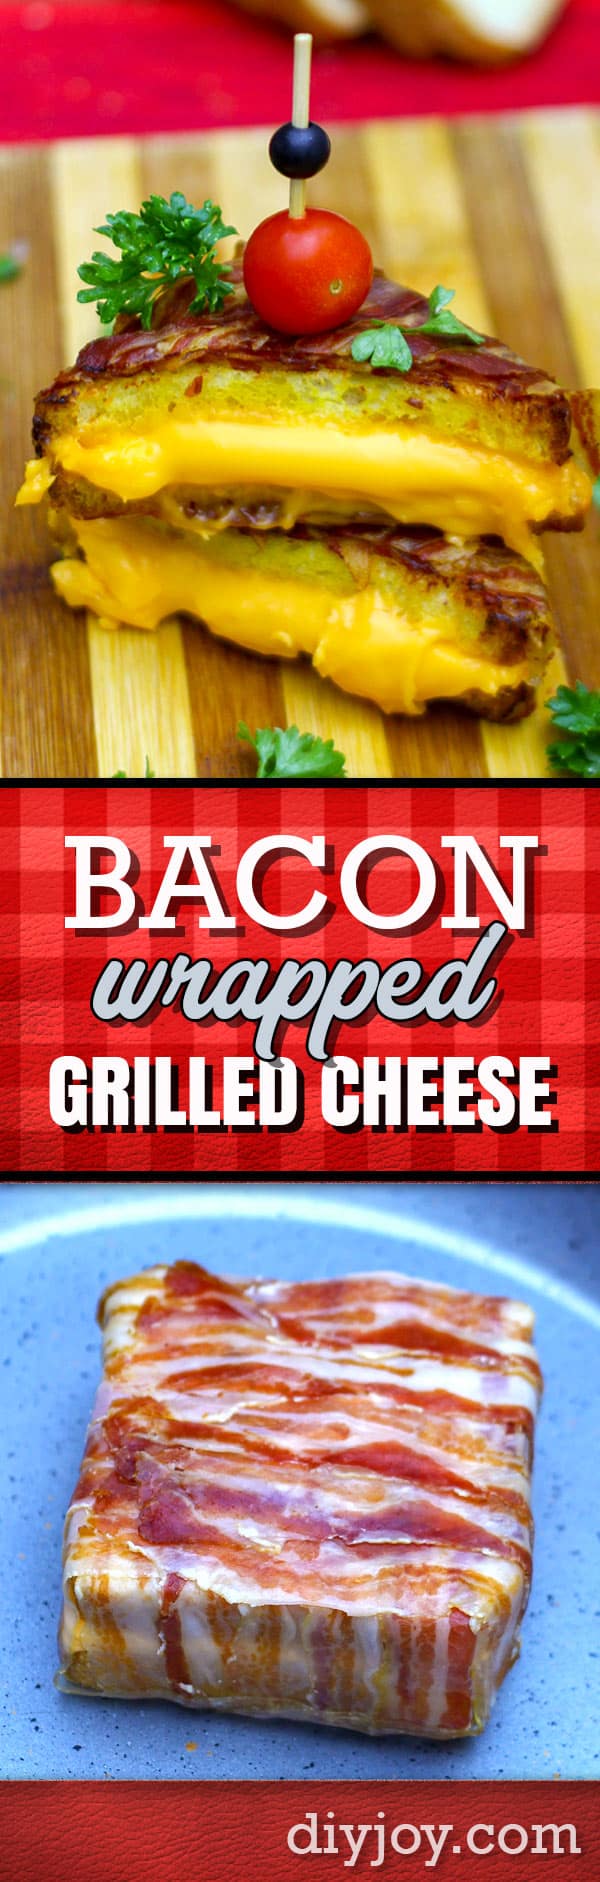 How To Make A Bacon Wrapped Grilled Cheese Sandwich - Step by Step Recipe Tutorial and Video - Easy Snack and Lunch Ideas